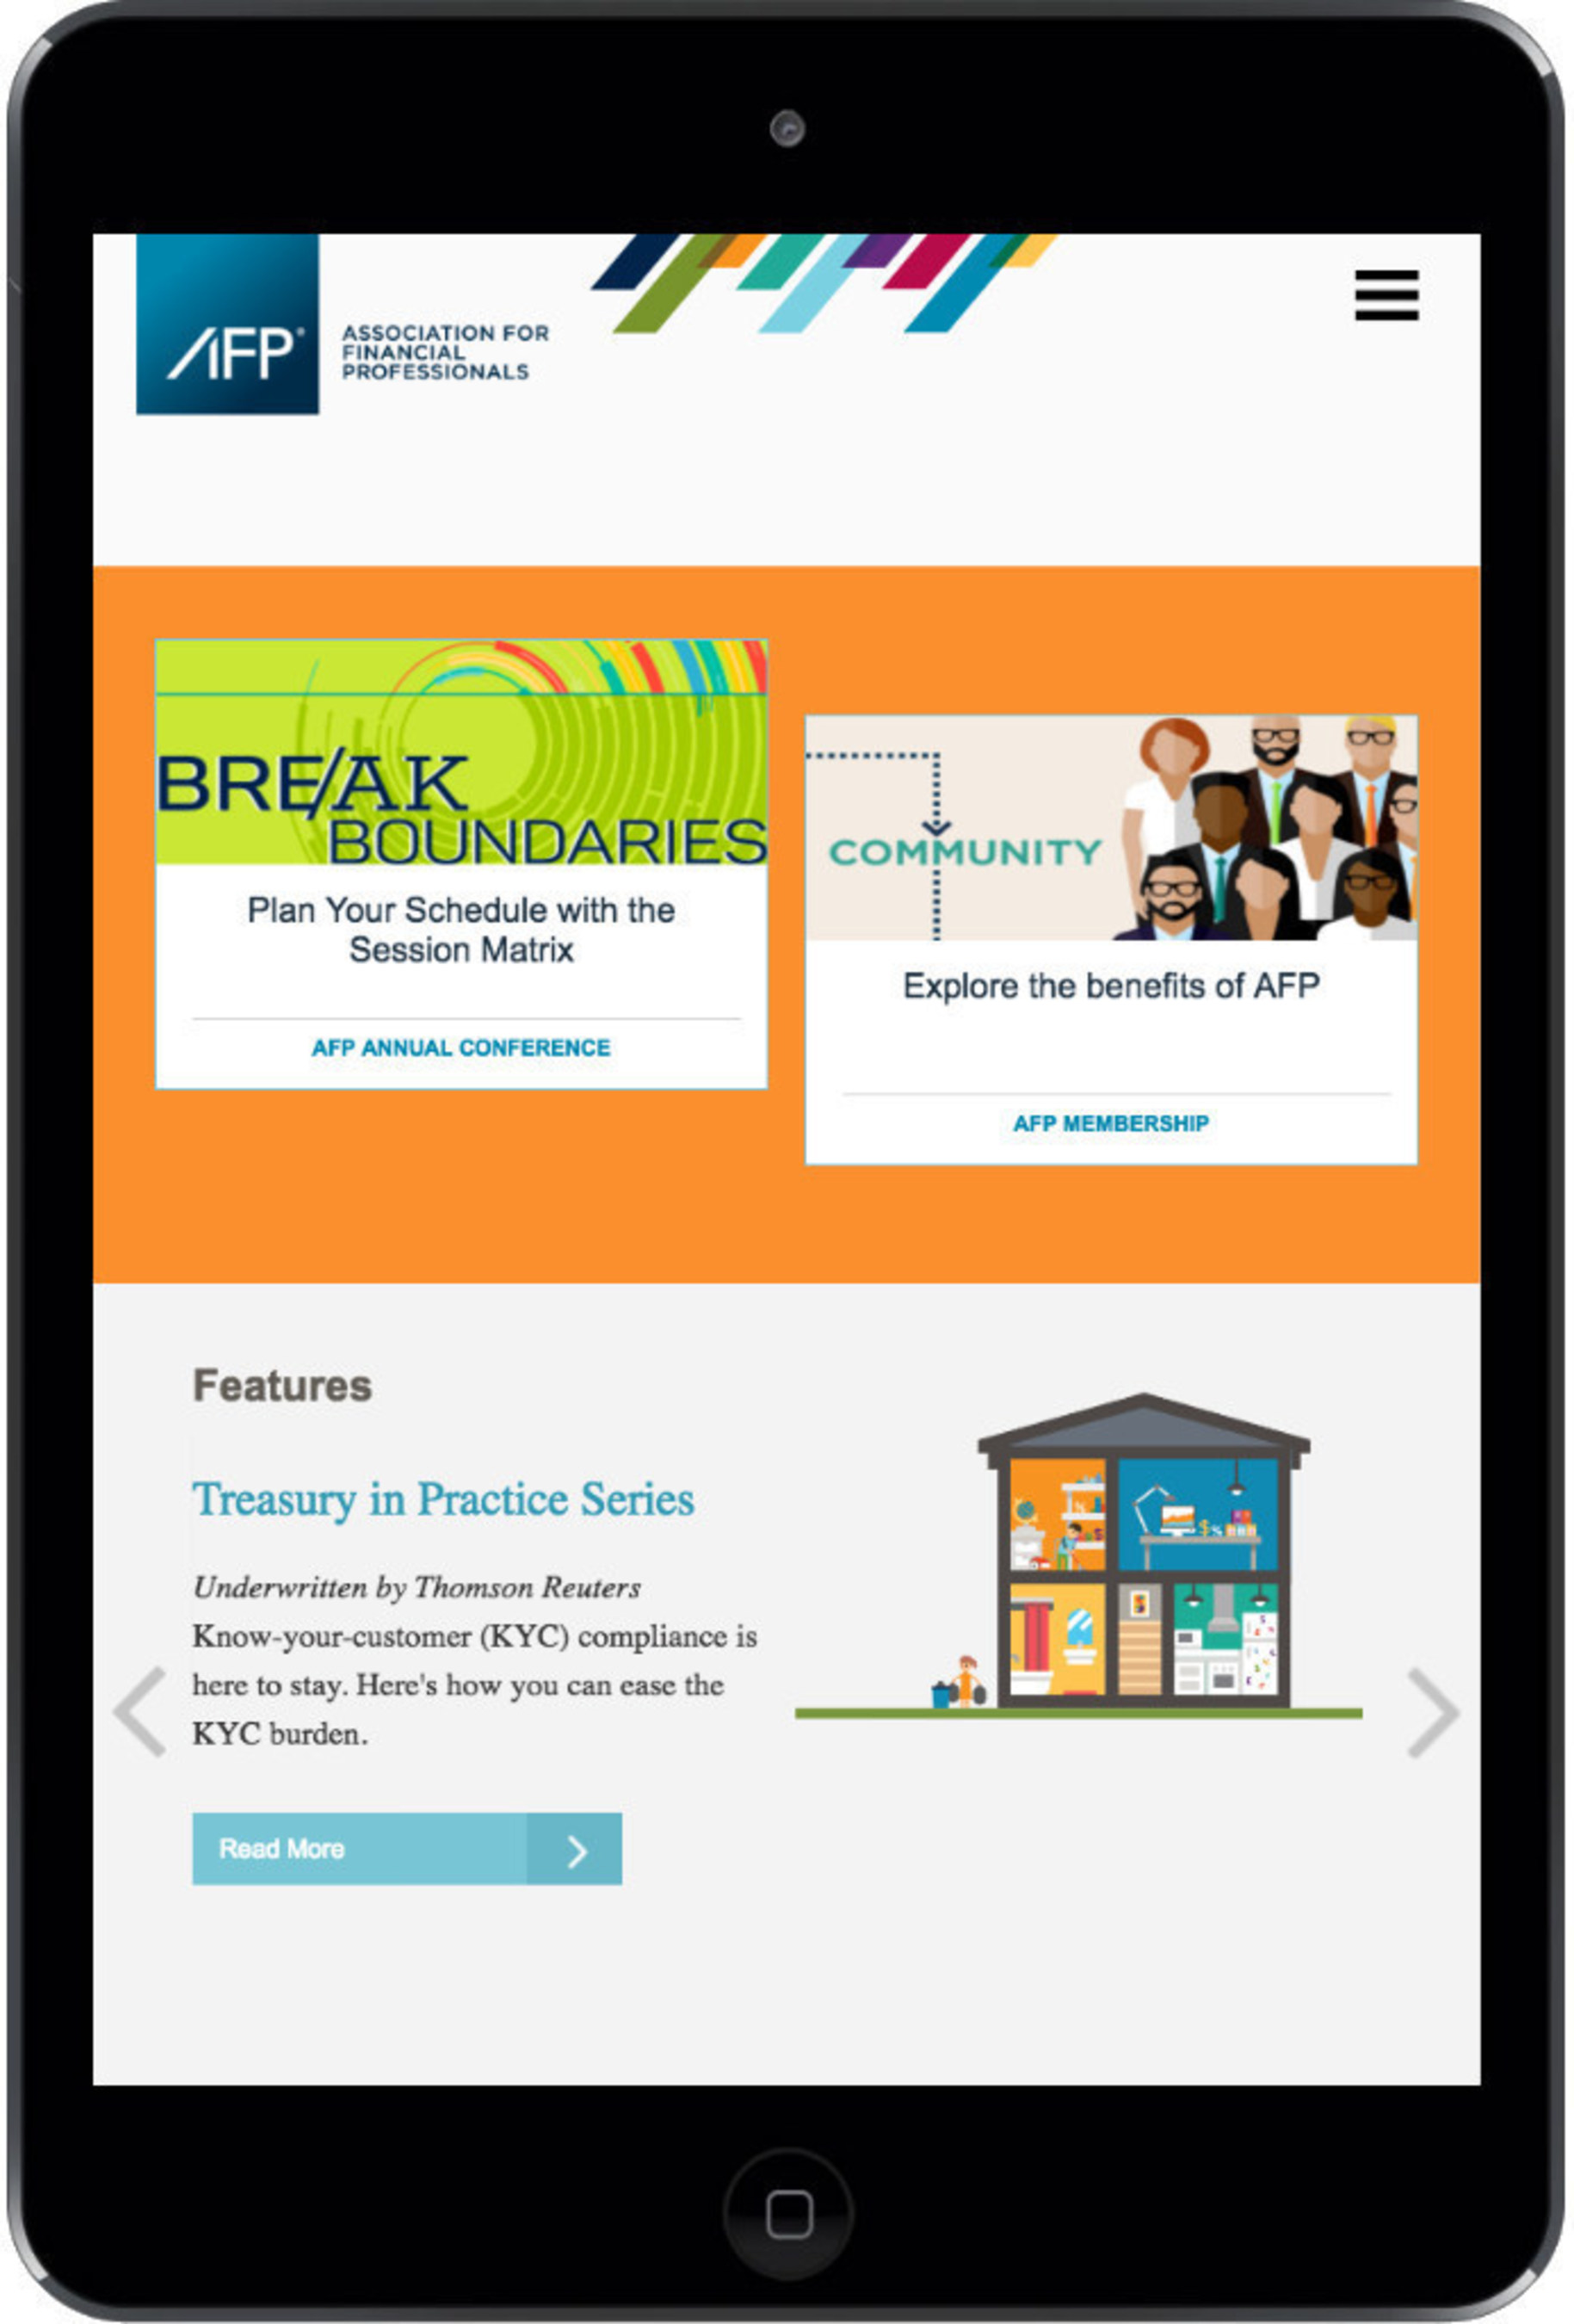 Fig Leaf Software designed and developed 5 new websites for the Association of Financial Professionals using the Progress Sitefinity CMS.